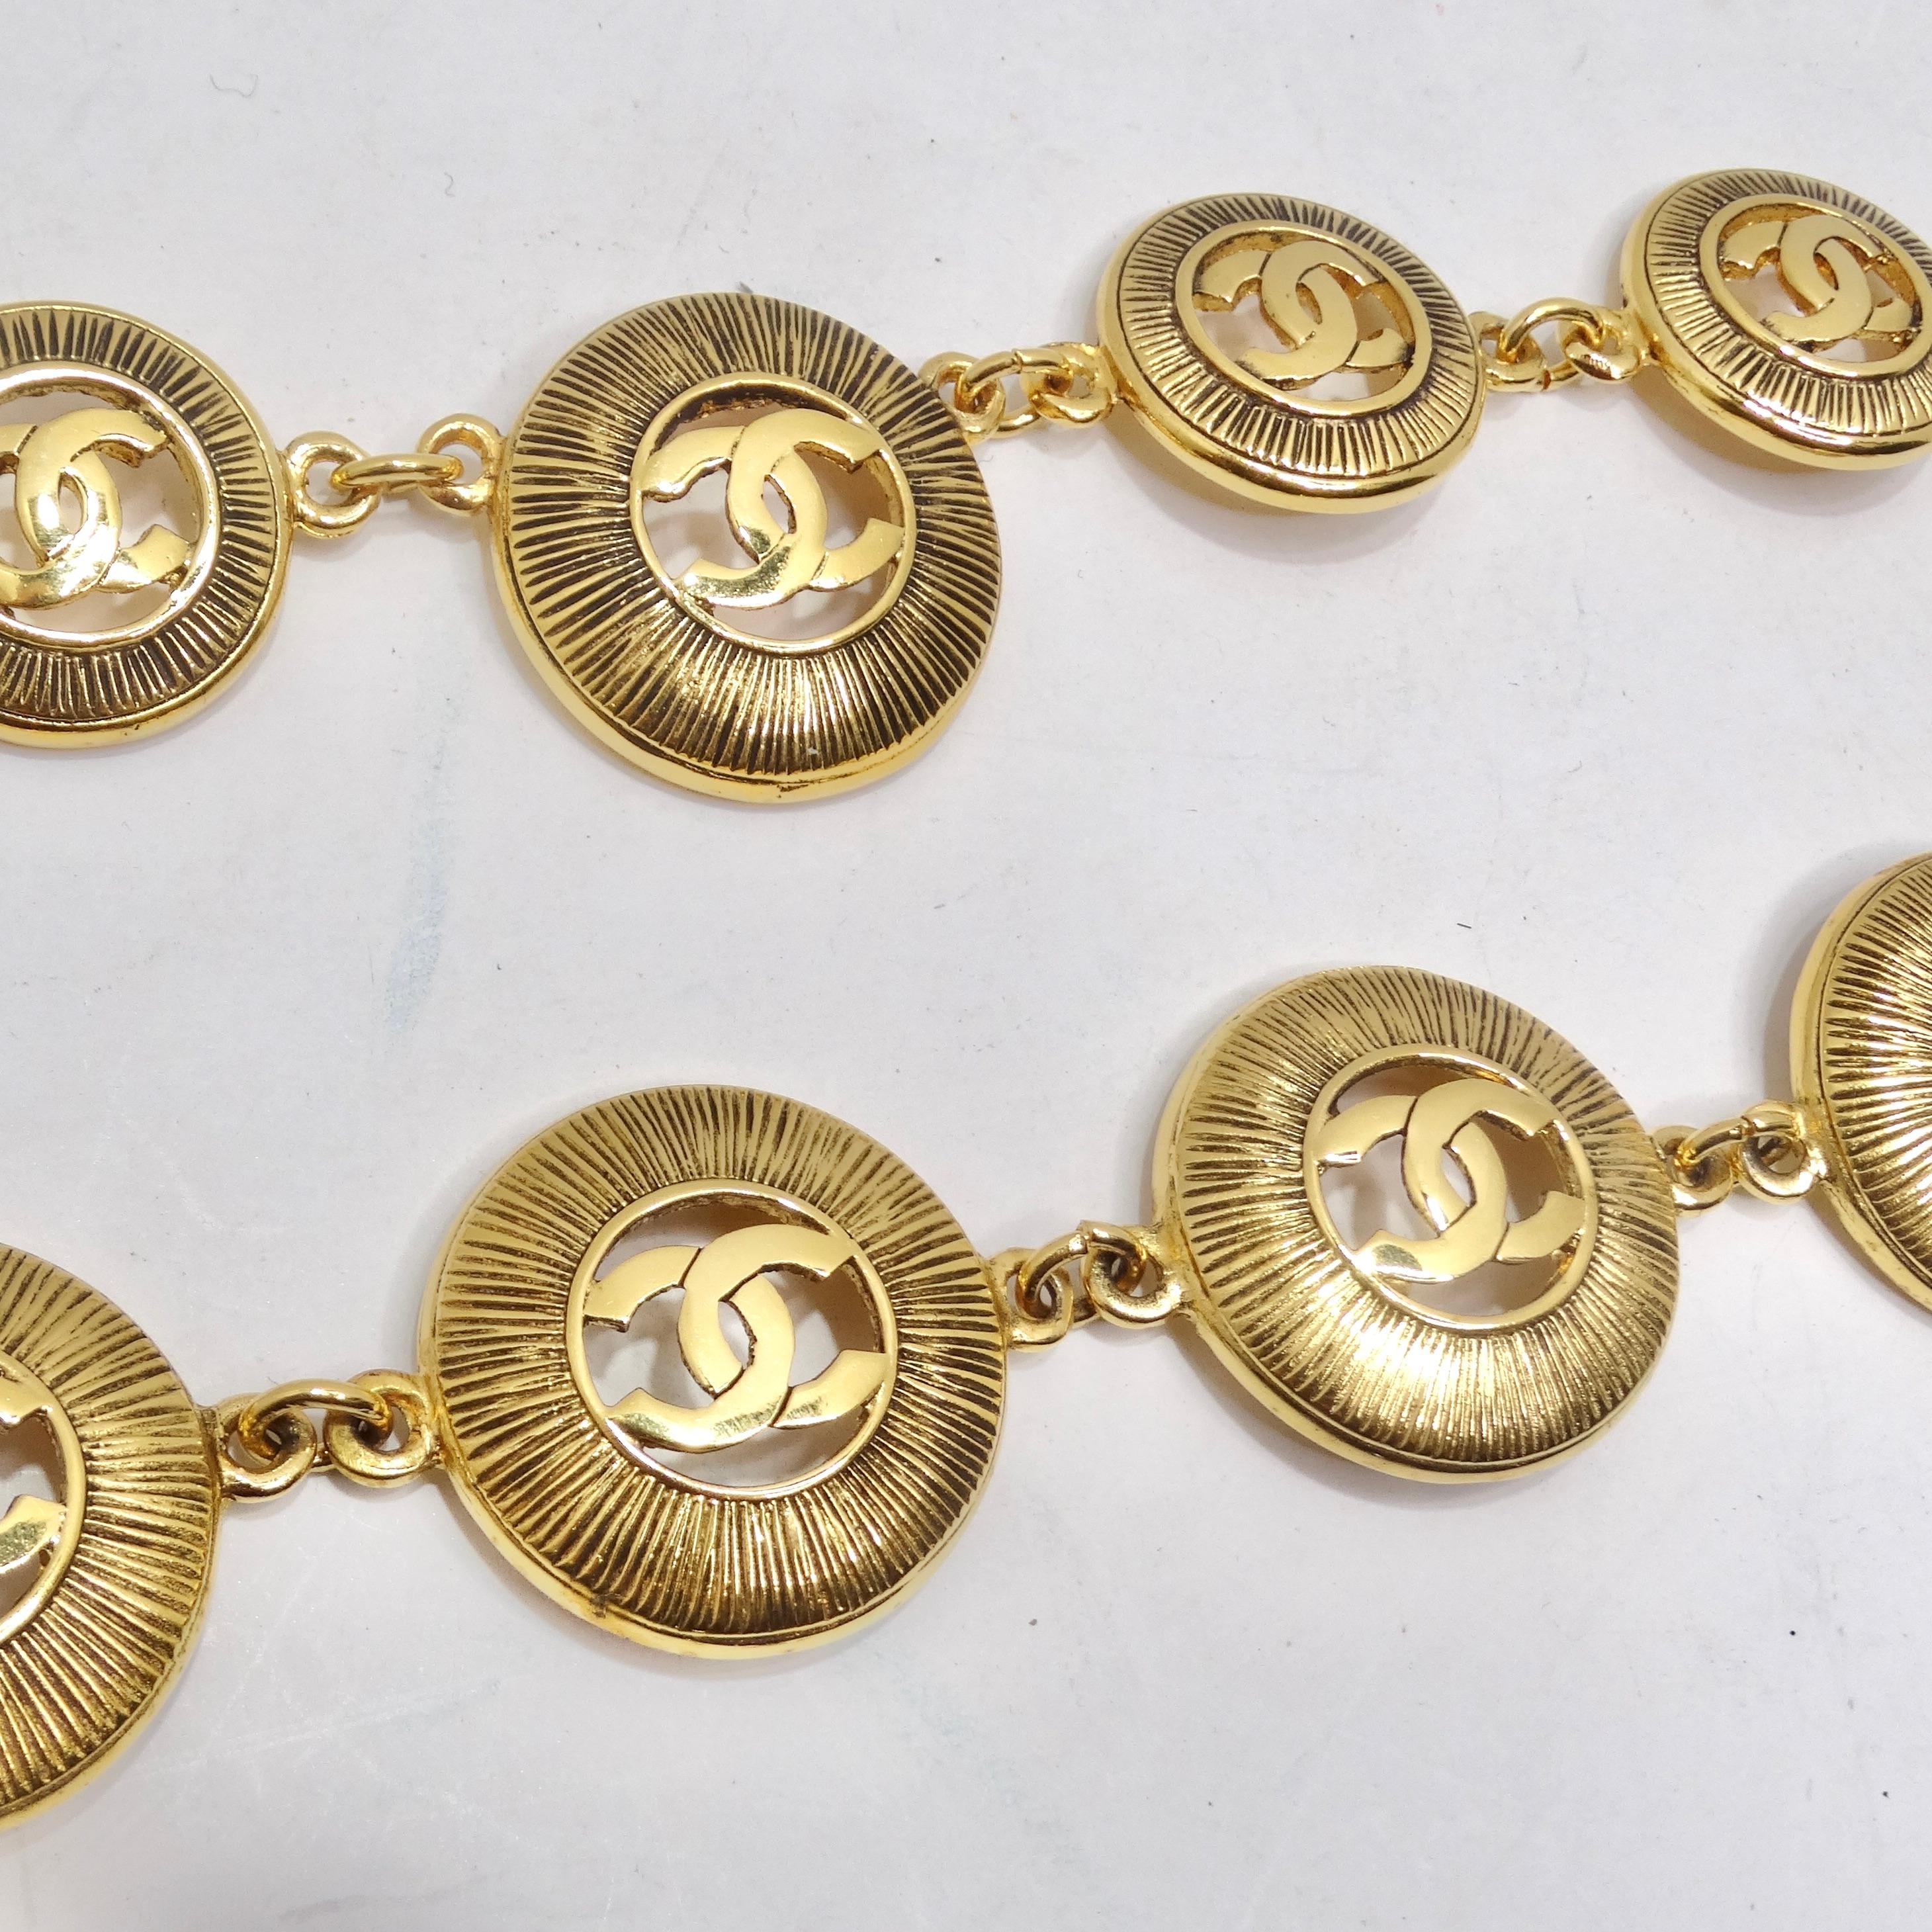 Chanel 1980s Logo Medallion Charm Necklace and Bracelet Set In Excellent Condition For Sale In Scottsdale, AZ